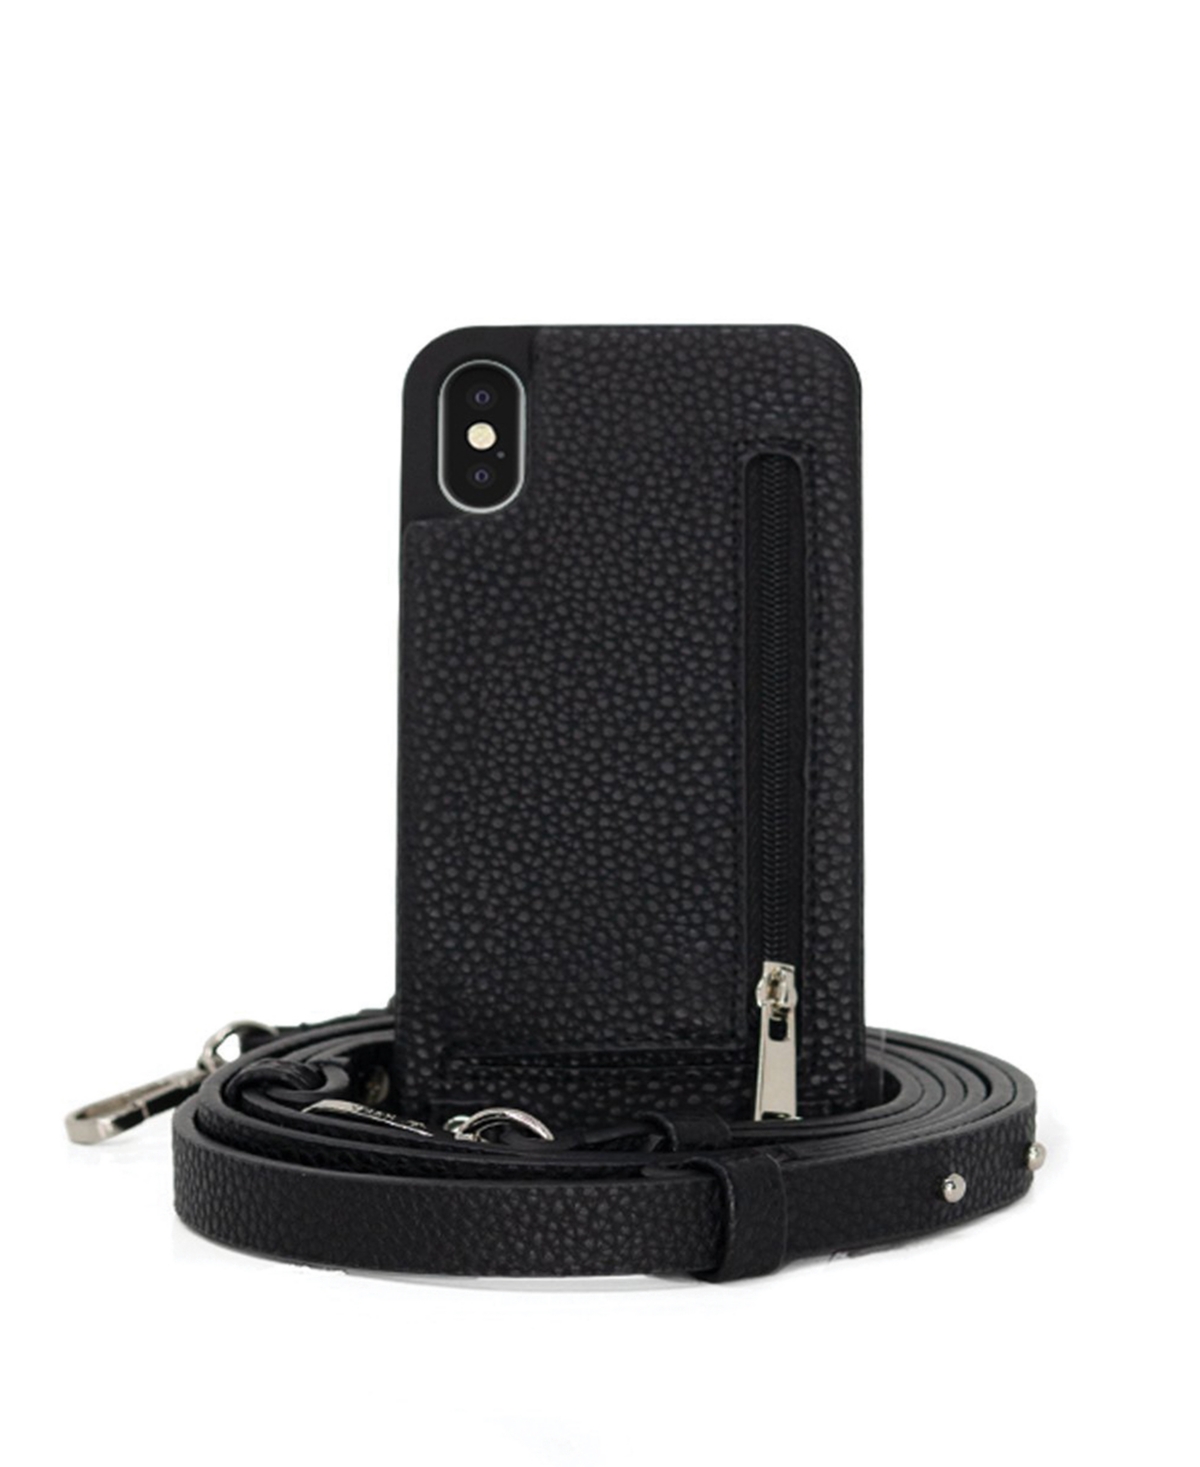 Hera Cases Crossbody X or Xs IPhone Case with Strap Wallet